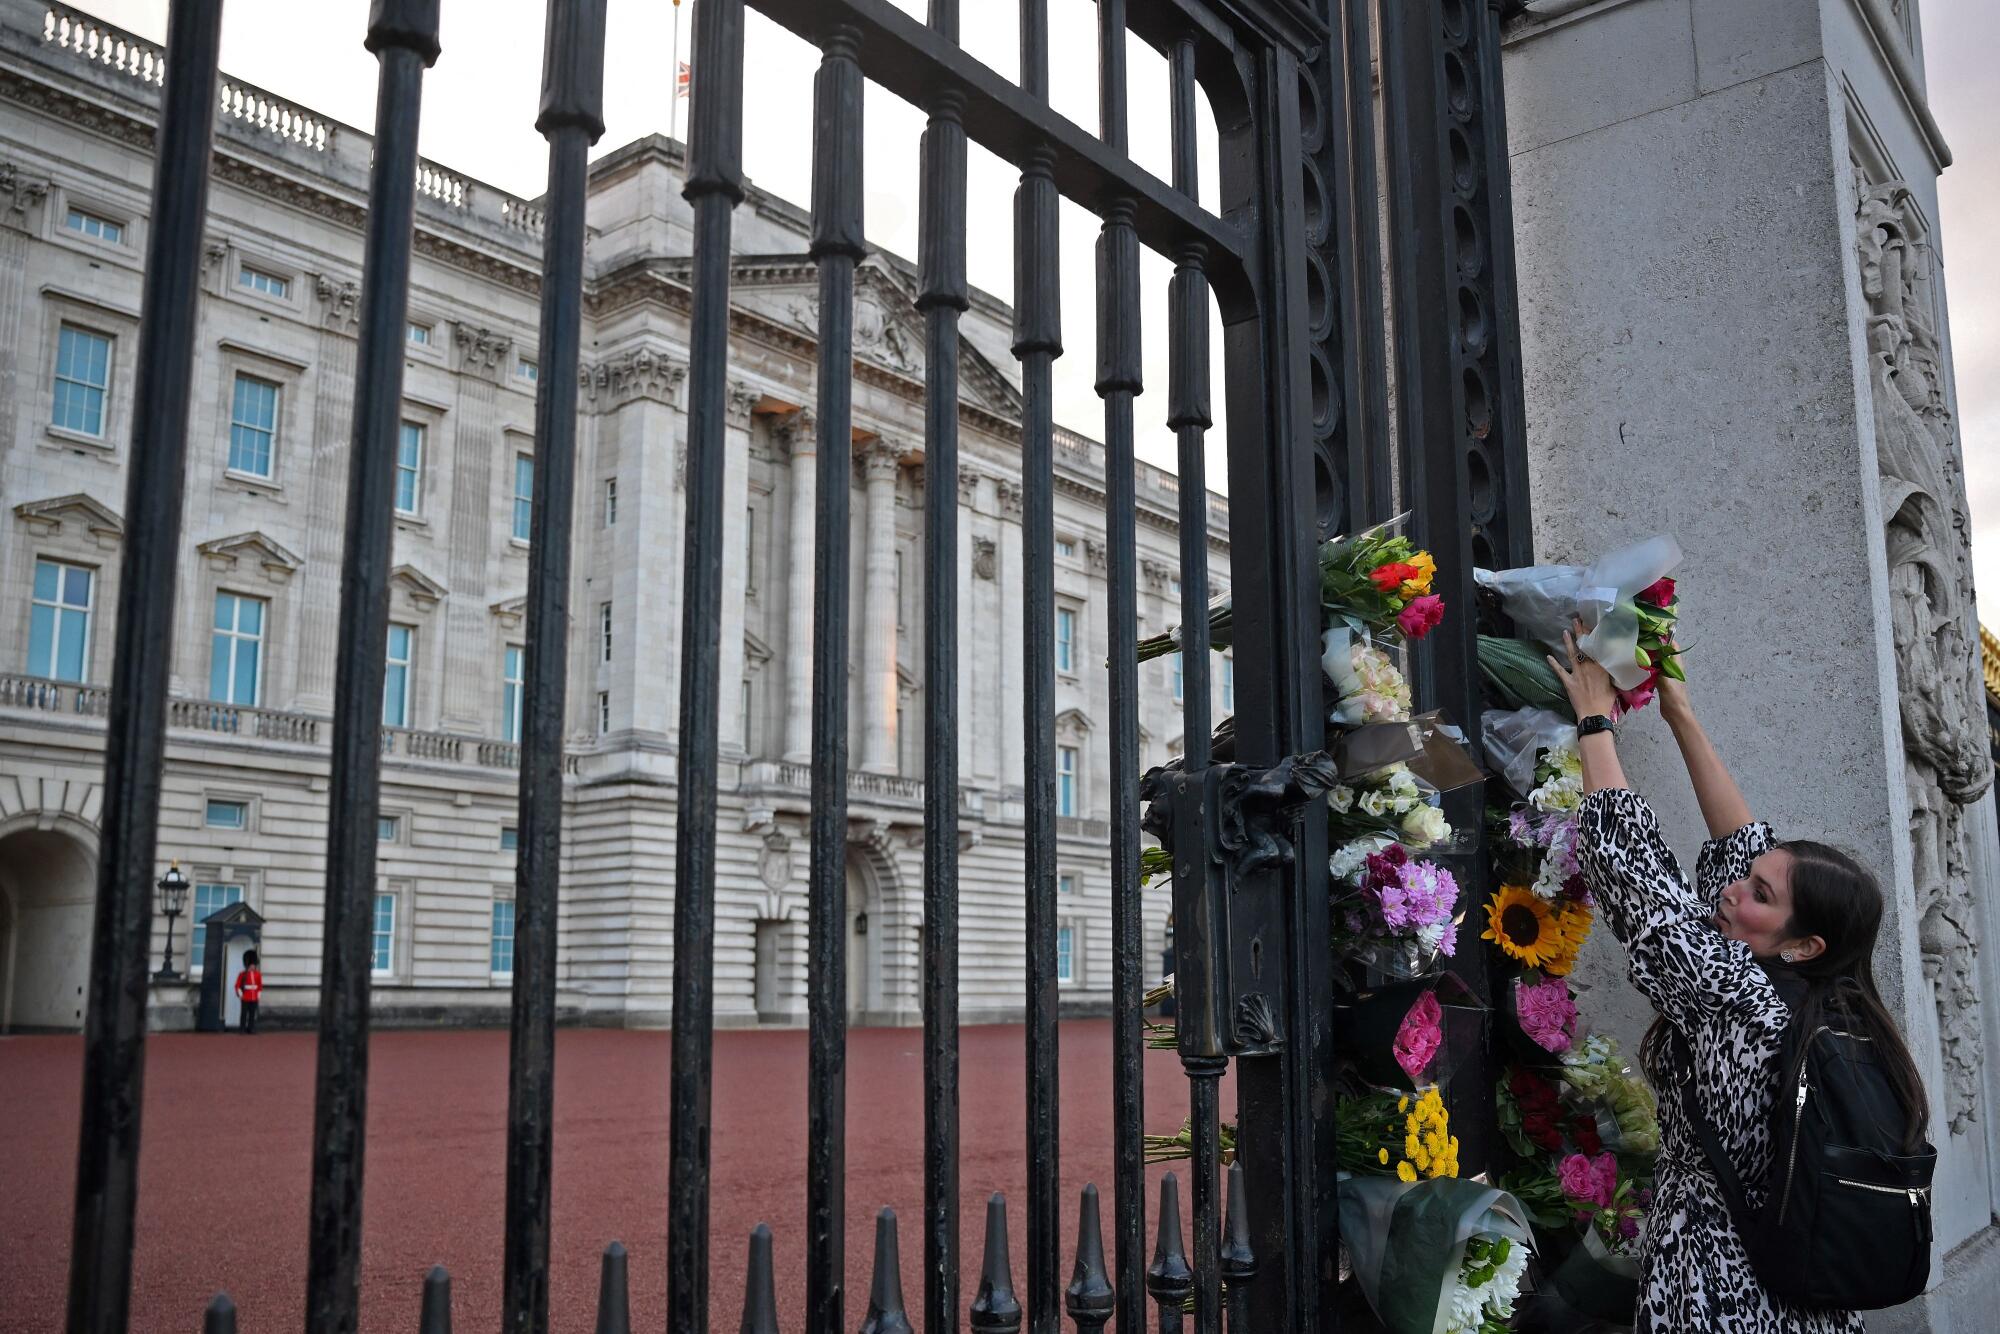 A woman tucks flowers into the gate outside Buckingham Palace in central London.